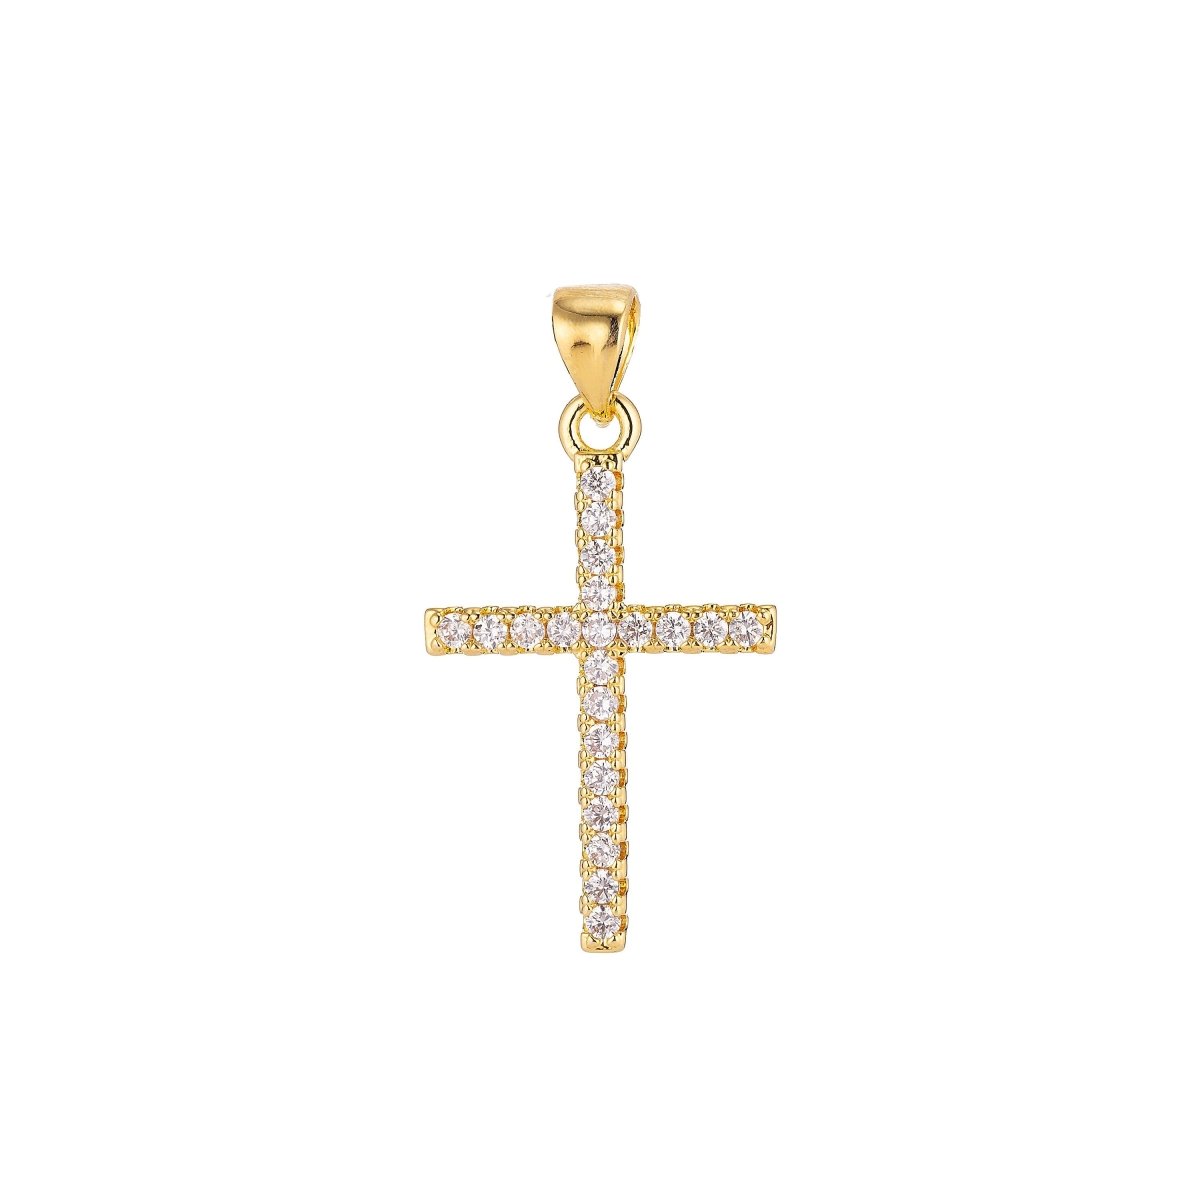 24K Gold Filled Christian Minimalist Simple Cross Jesus Cubic Zirconia Necklace Pendant Bracelet Earring Charm Bails for Jewelry Making AA-760 H-054 H-247 - DLUXCA